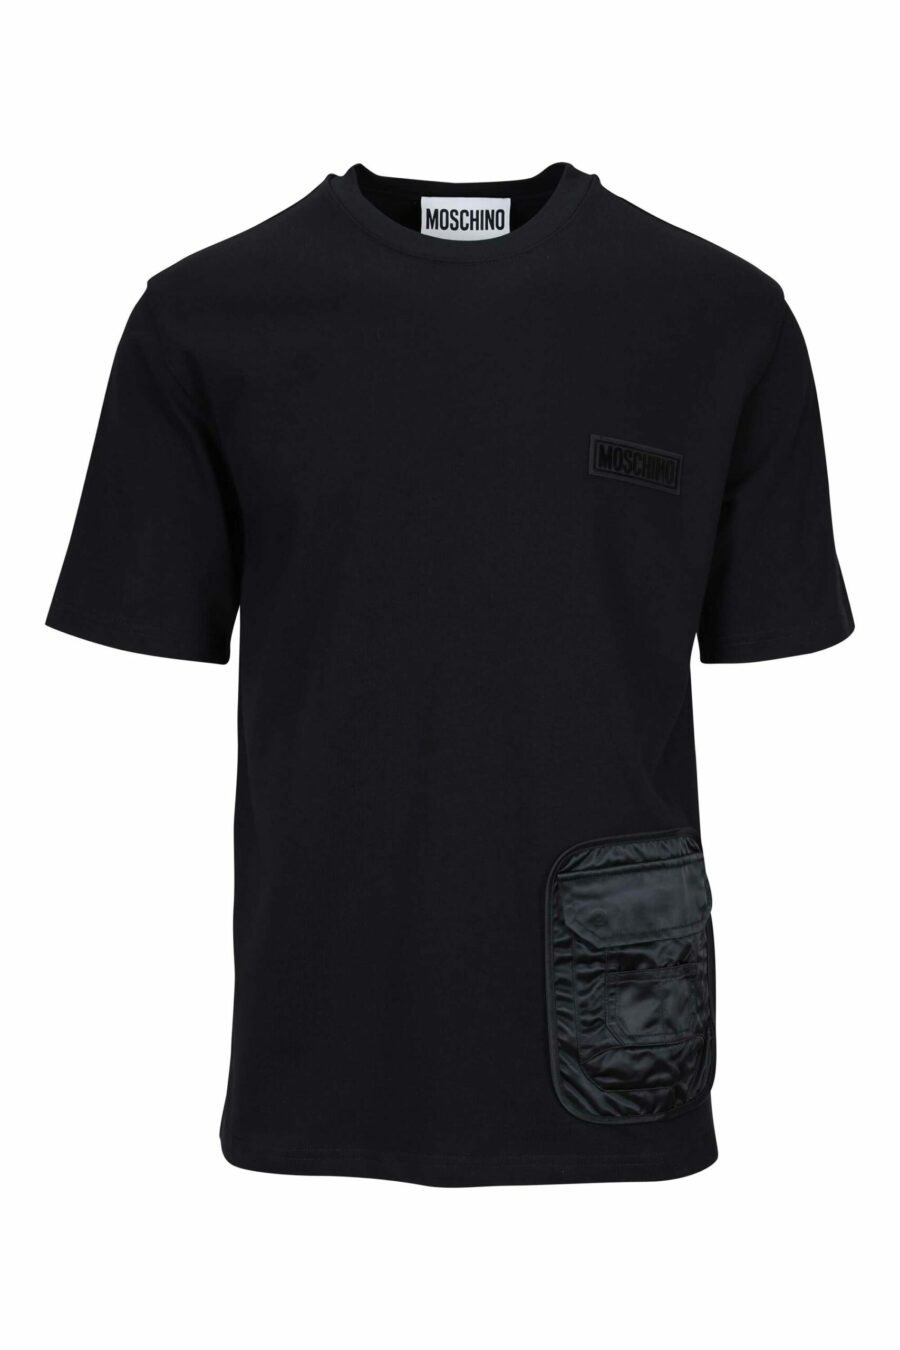 Black mix T-shirt with monochrome pocket and logo label - 667113452036 scaled